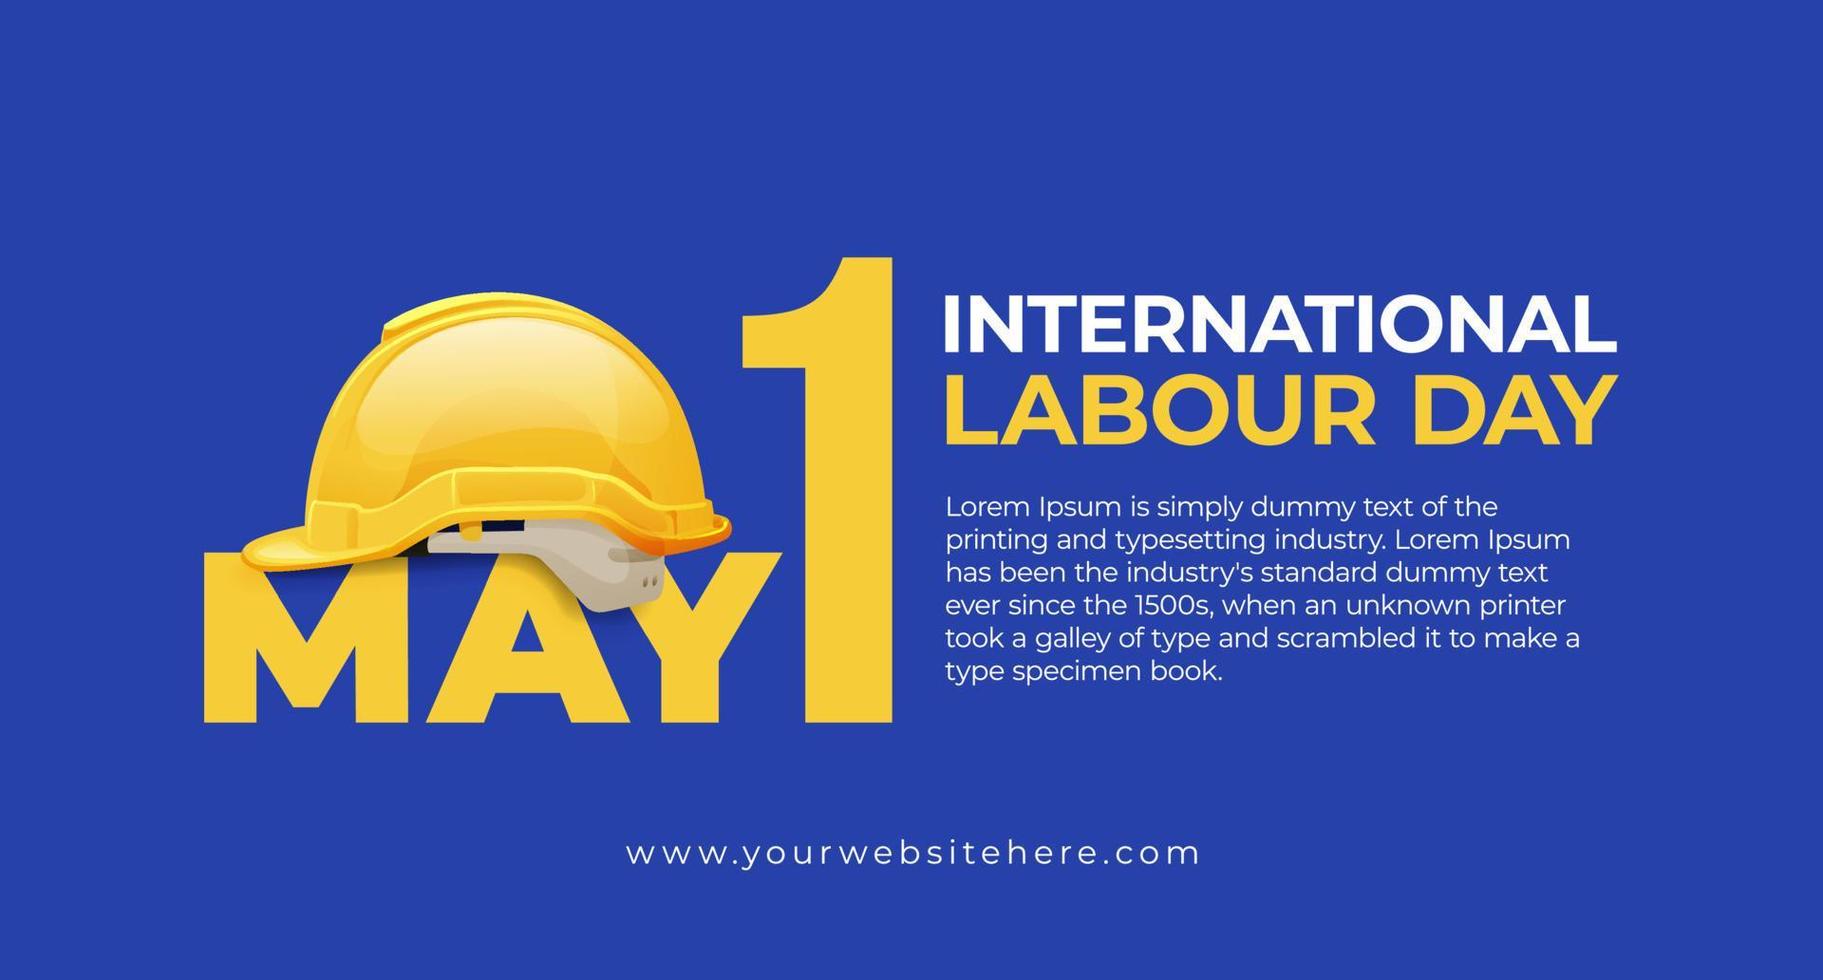 International labour Day May 1 Banner With Safety Helmet Illustration Concept vector